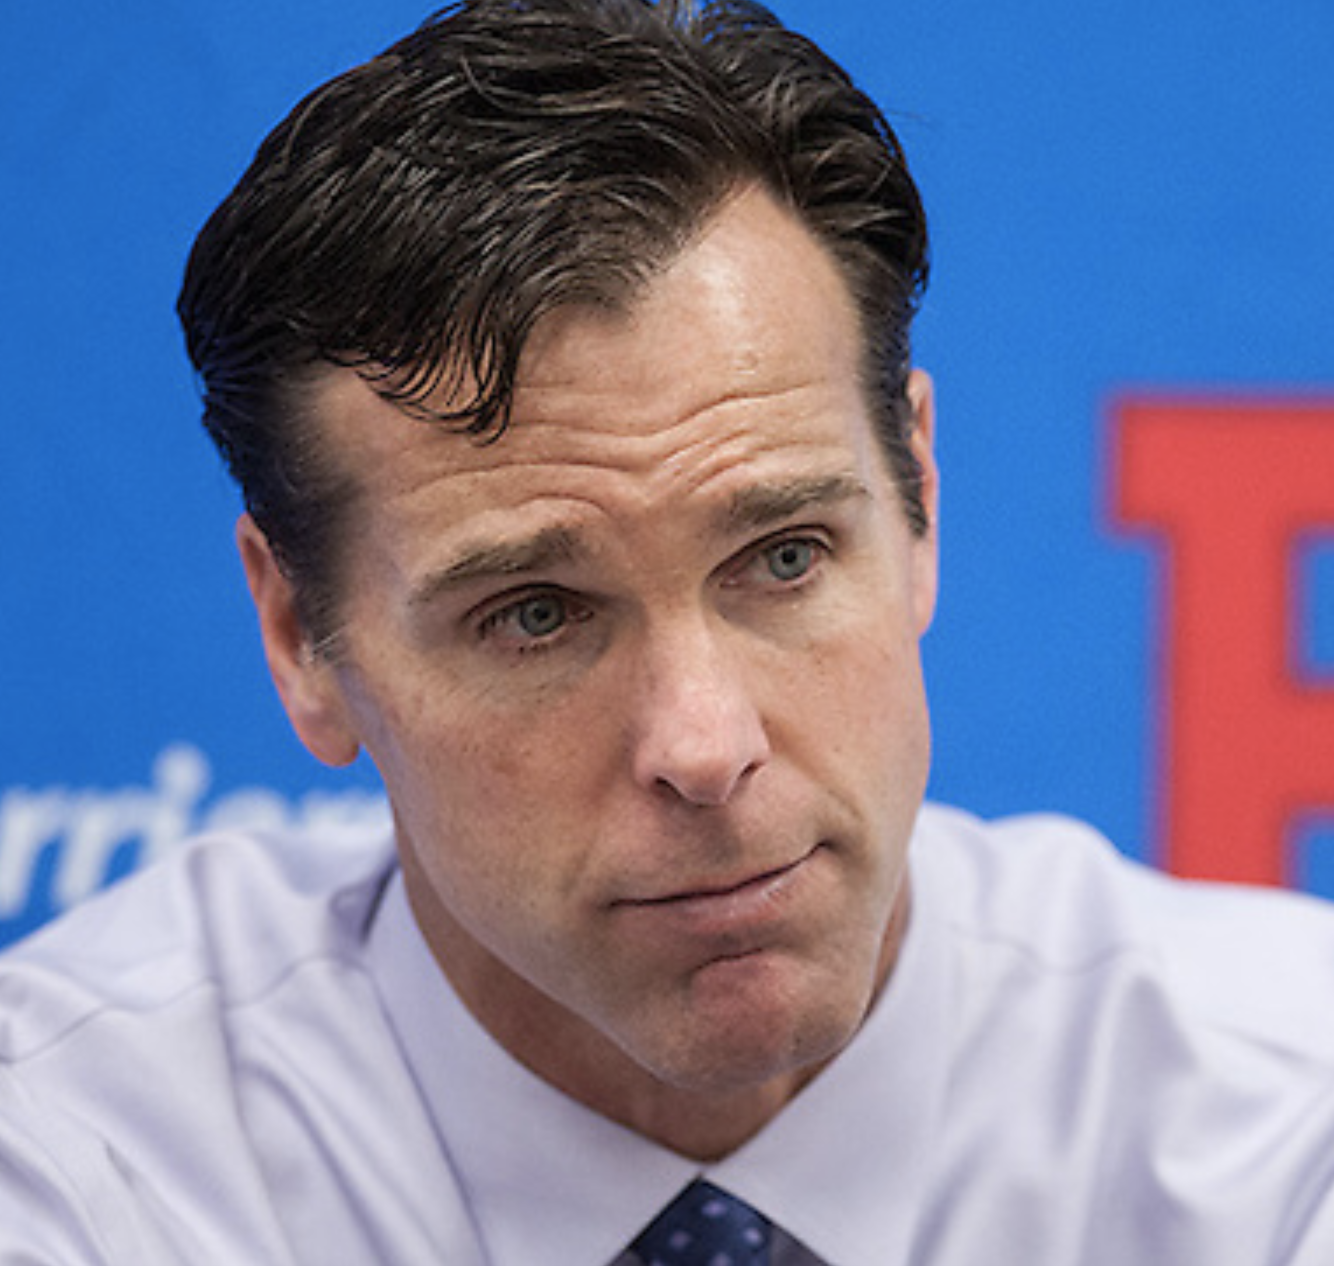 On May 23 in New York Rangers history: David Quinn becomes the coach